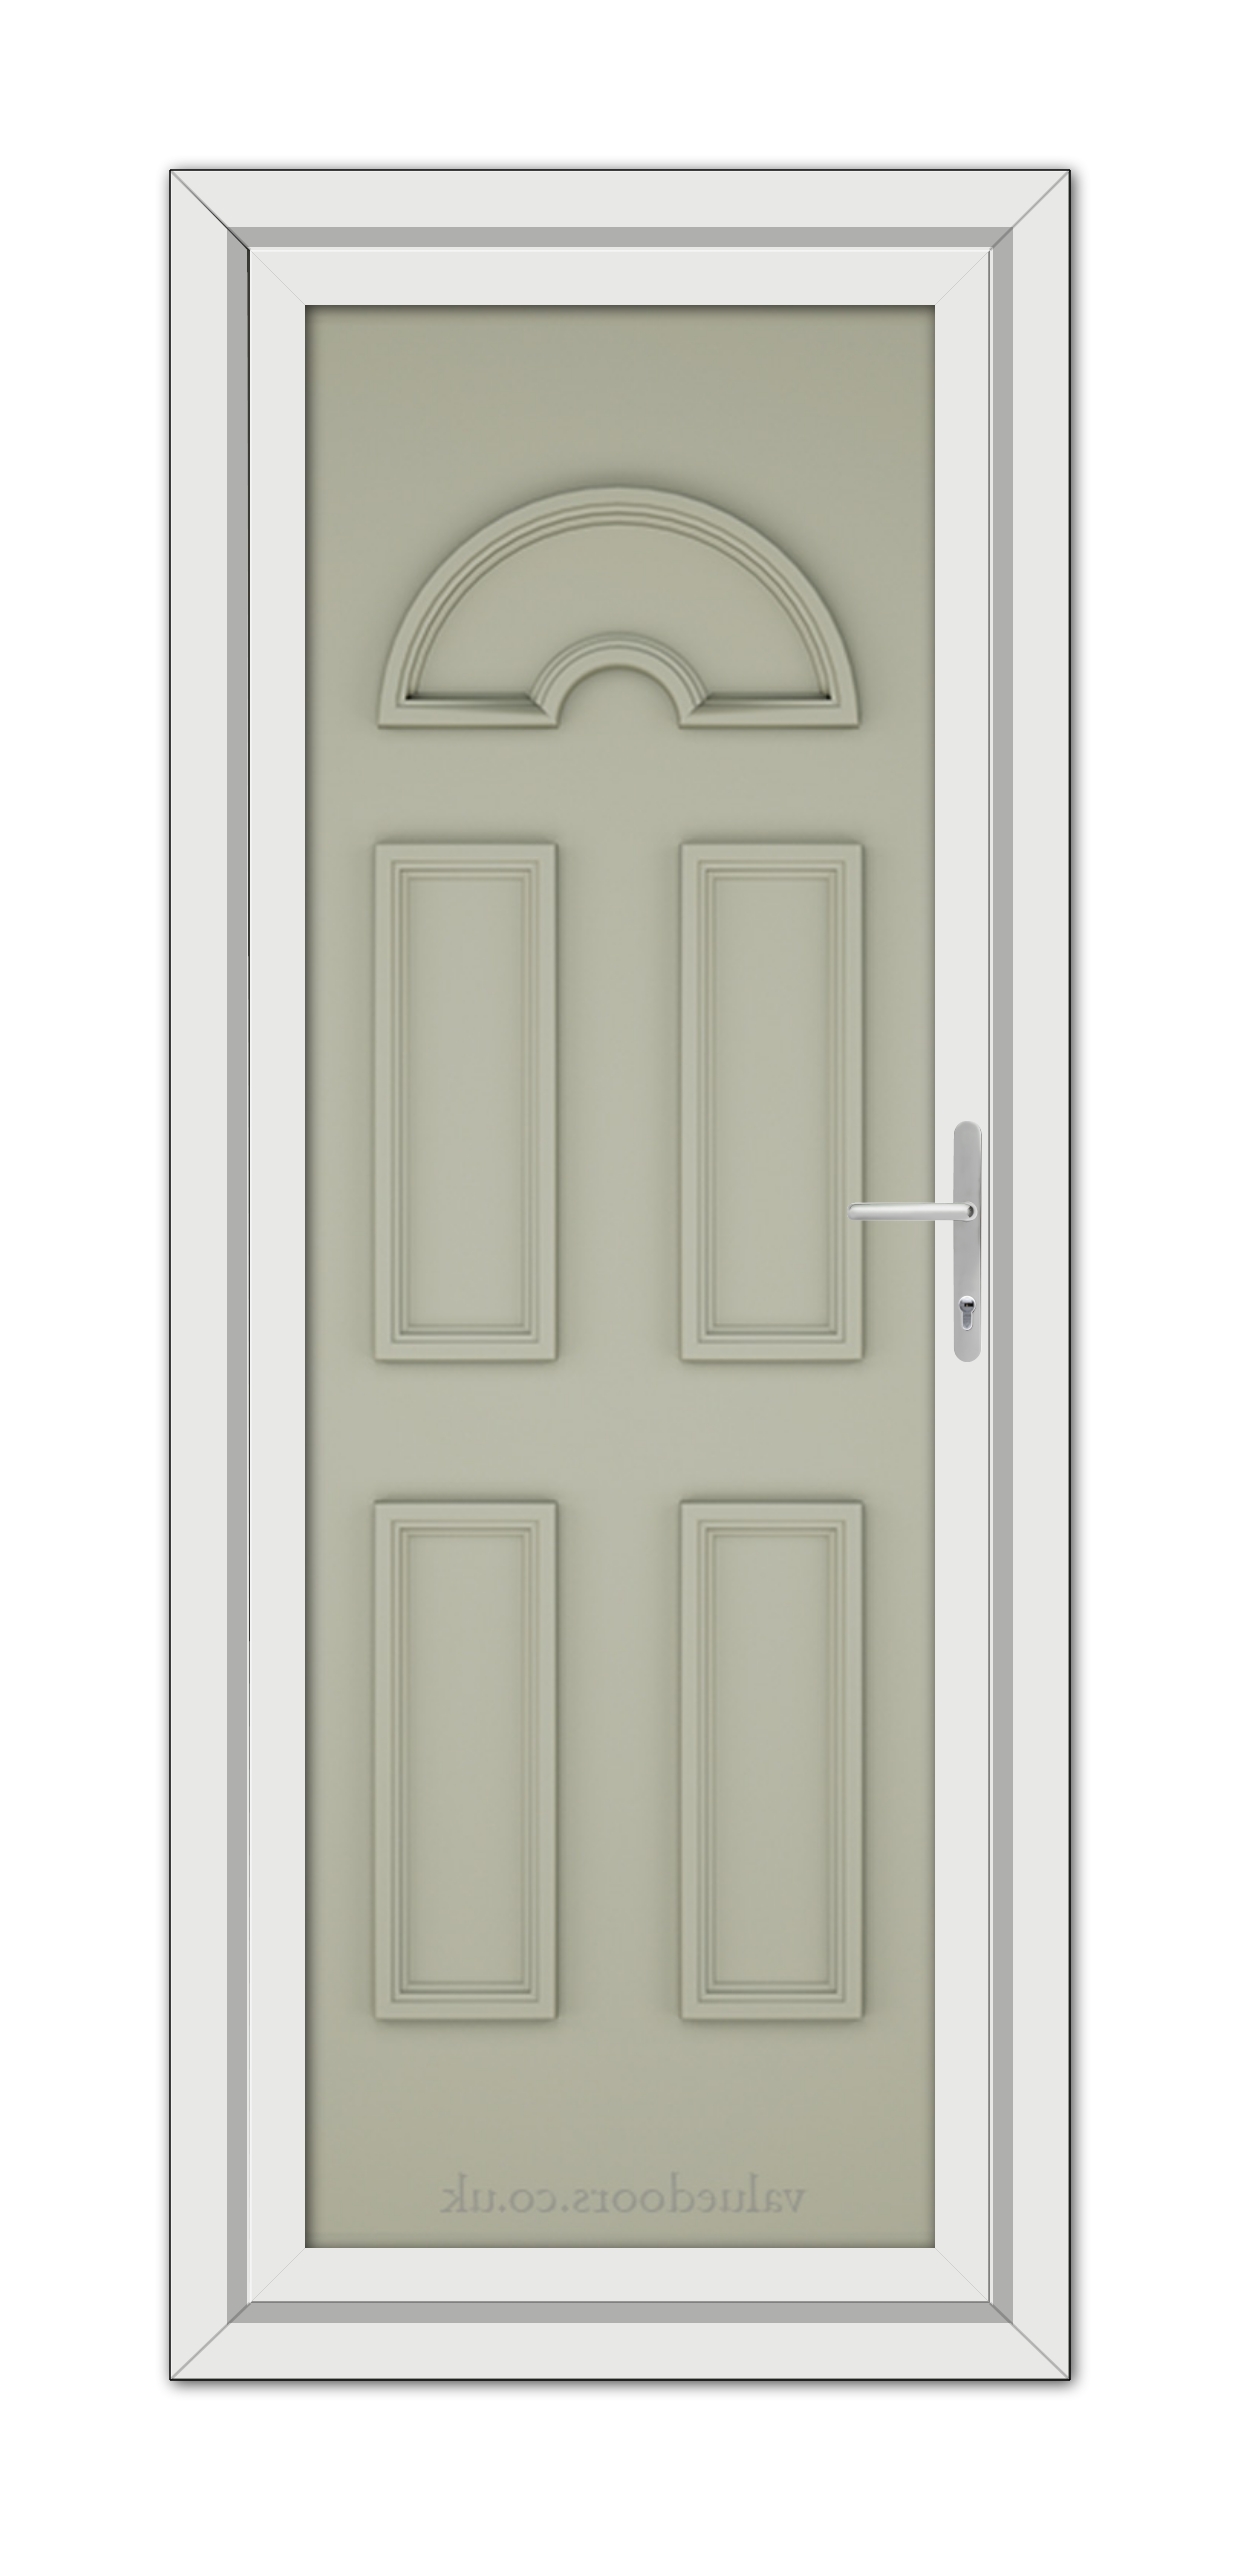 A Agate grey, vertical, six-panel door with a semicircular transom window and a white handle, set within a white frame.